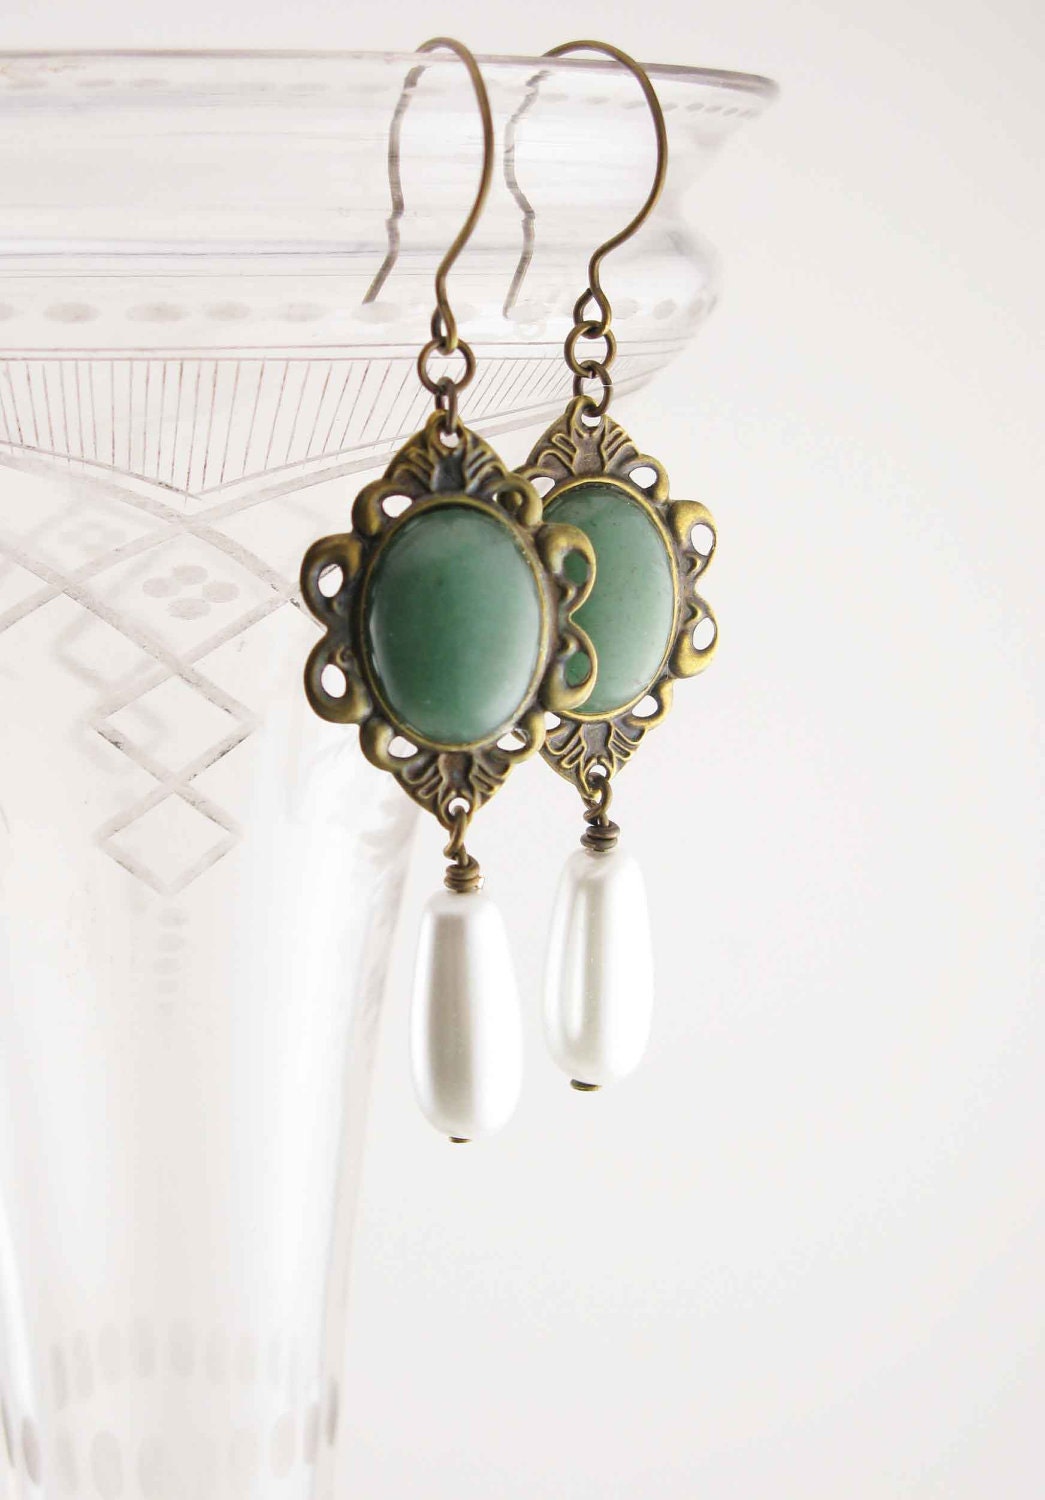 Made to order - Renaissance Tudor reproduction earrings - Drop pearls and green aventurine - Hand assembled - mejjewelry